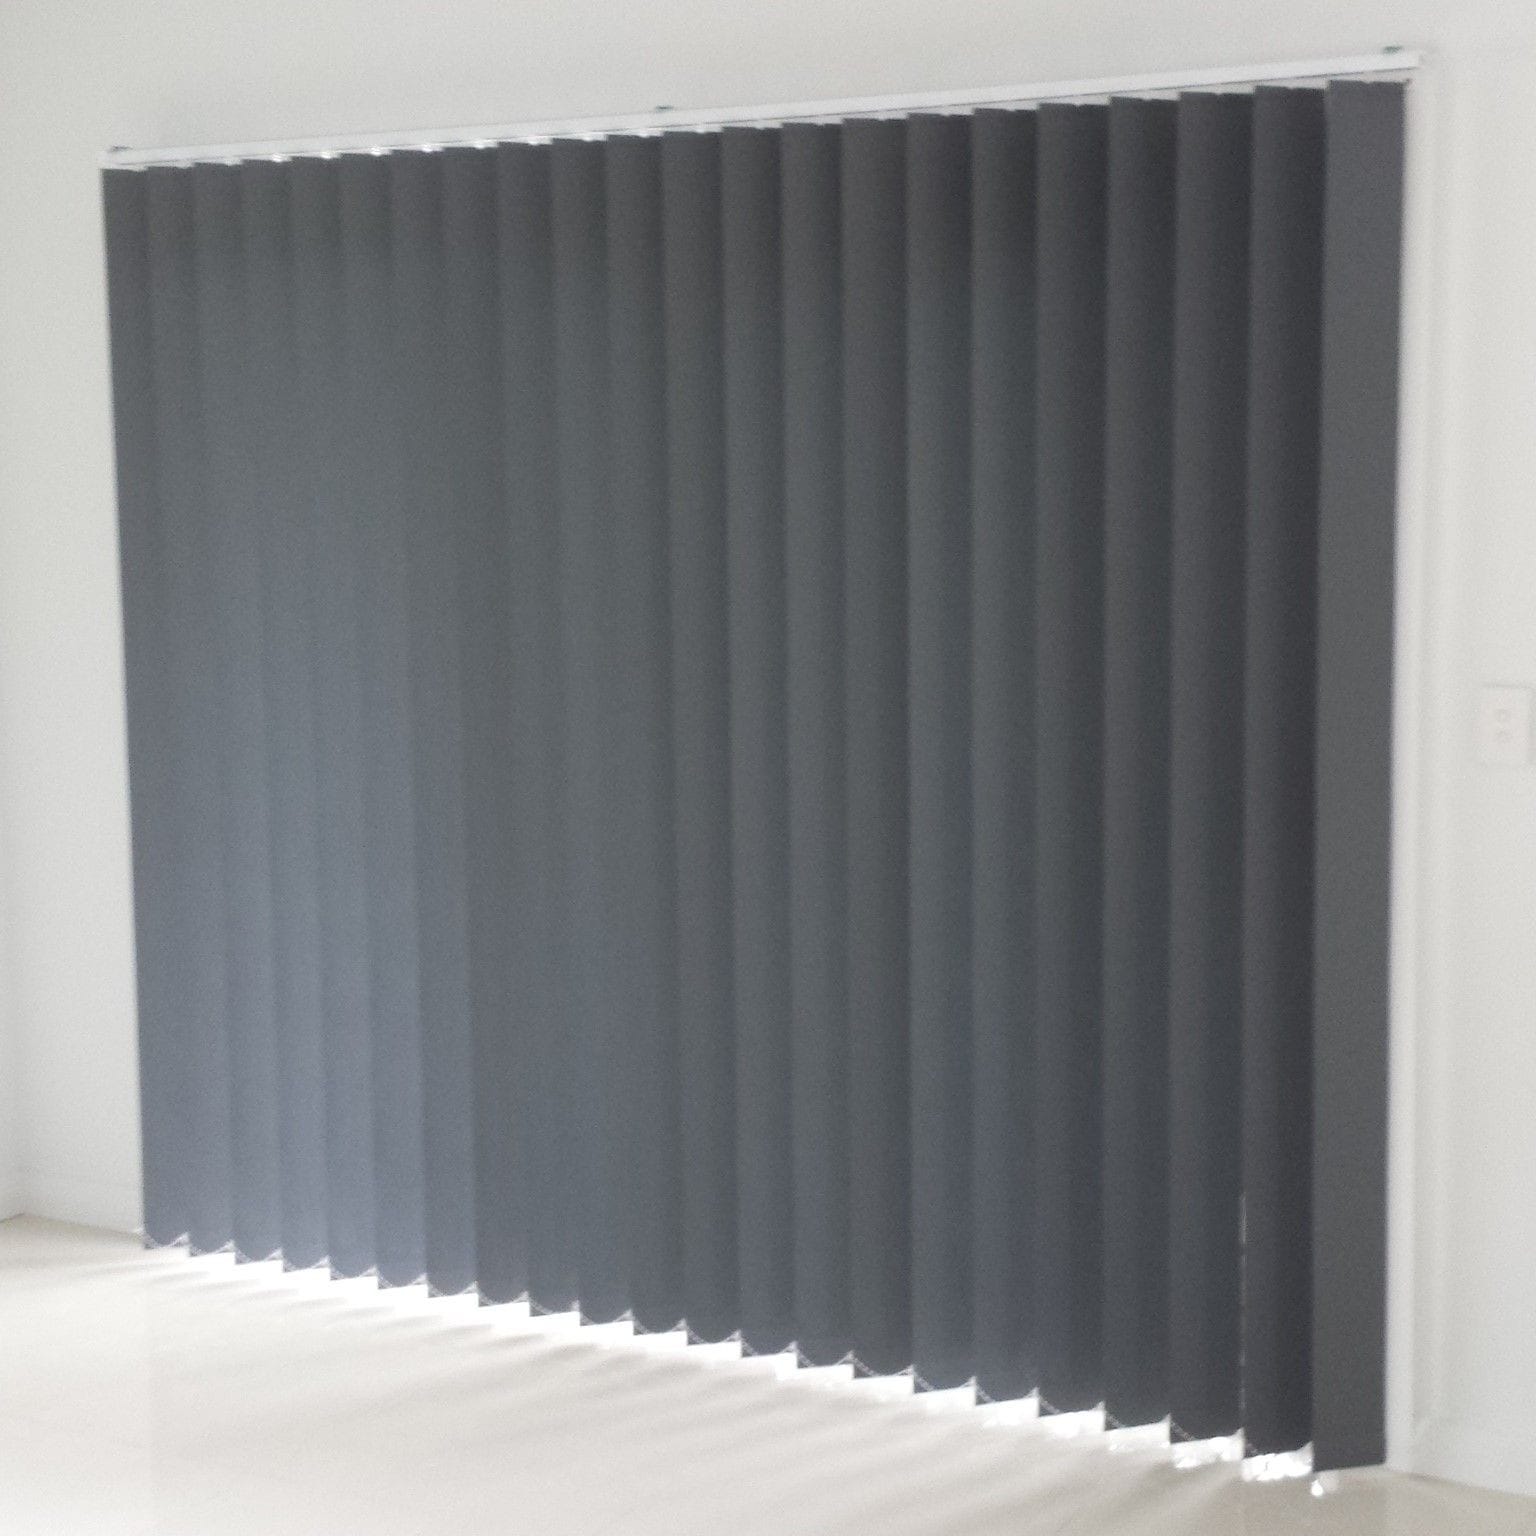 Vertical Blinds are custom-made to fit your window using high-quality fabrics such as Blockout or Sheer. This product offers Vertical Blinds using 89 mm slats.